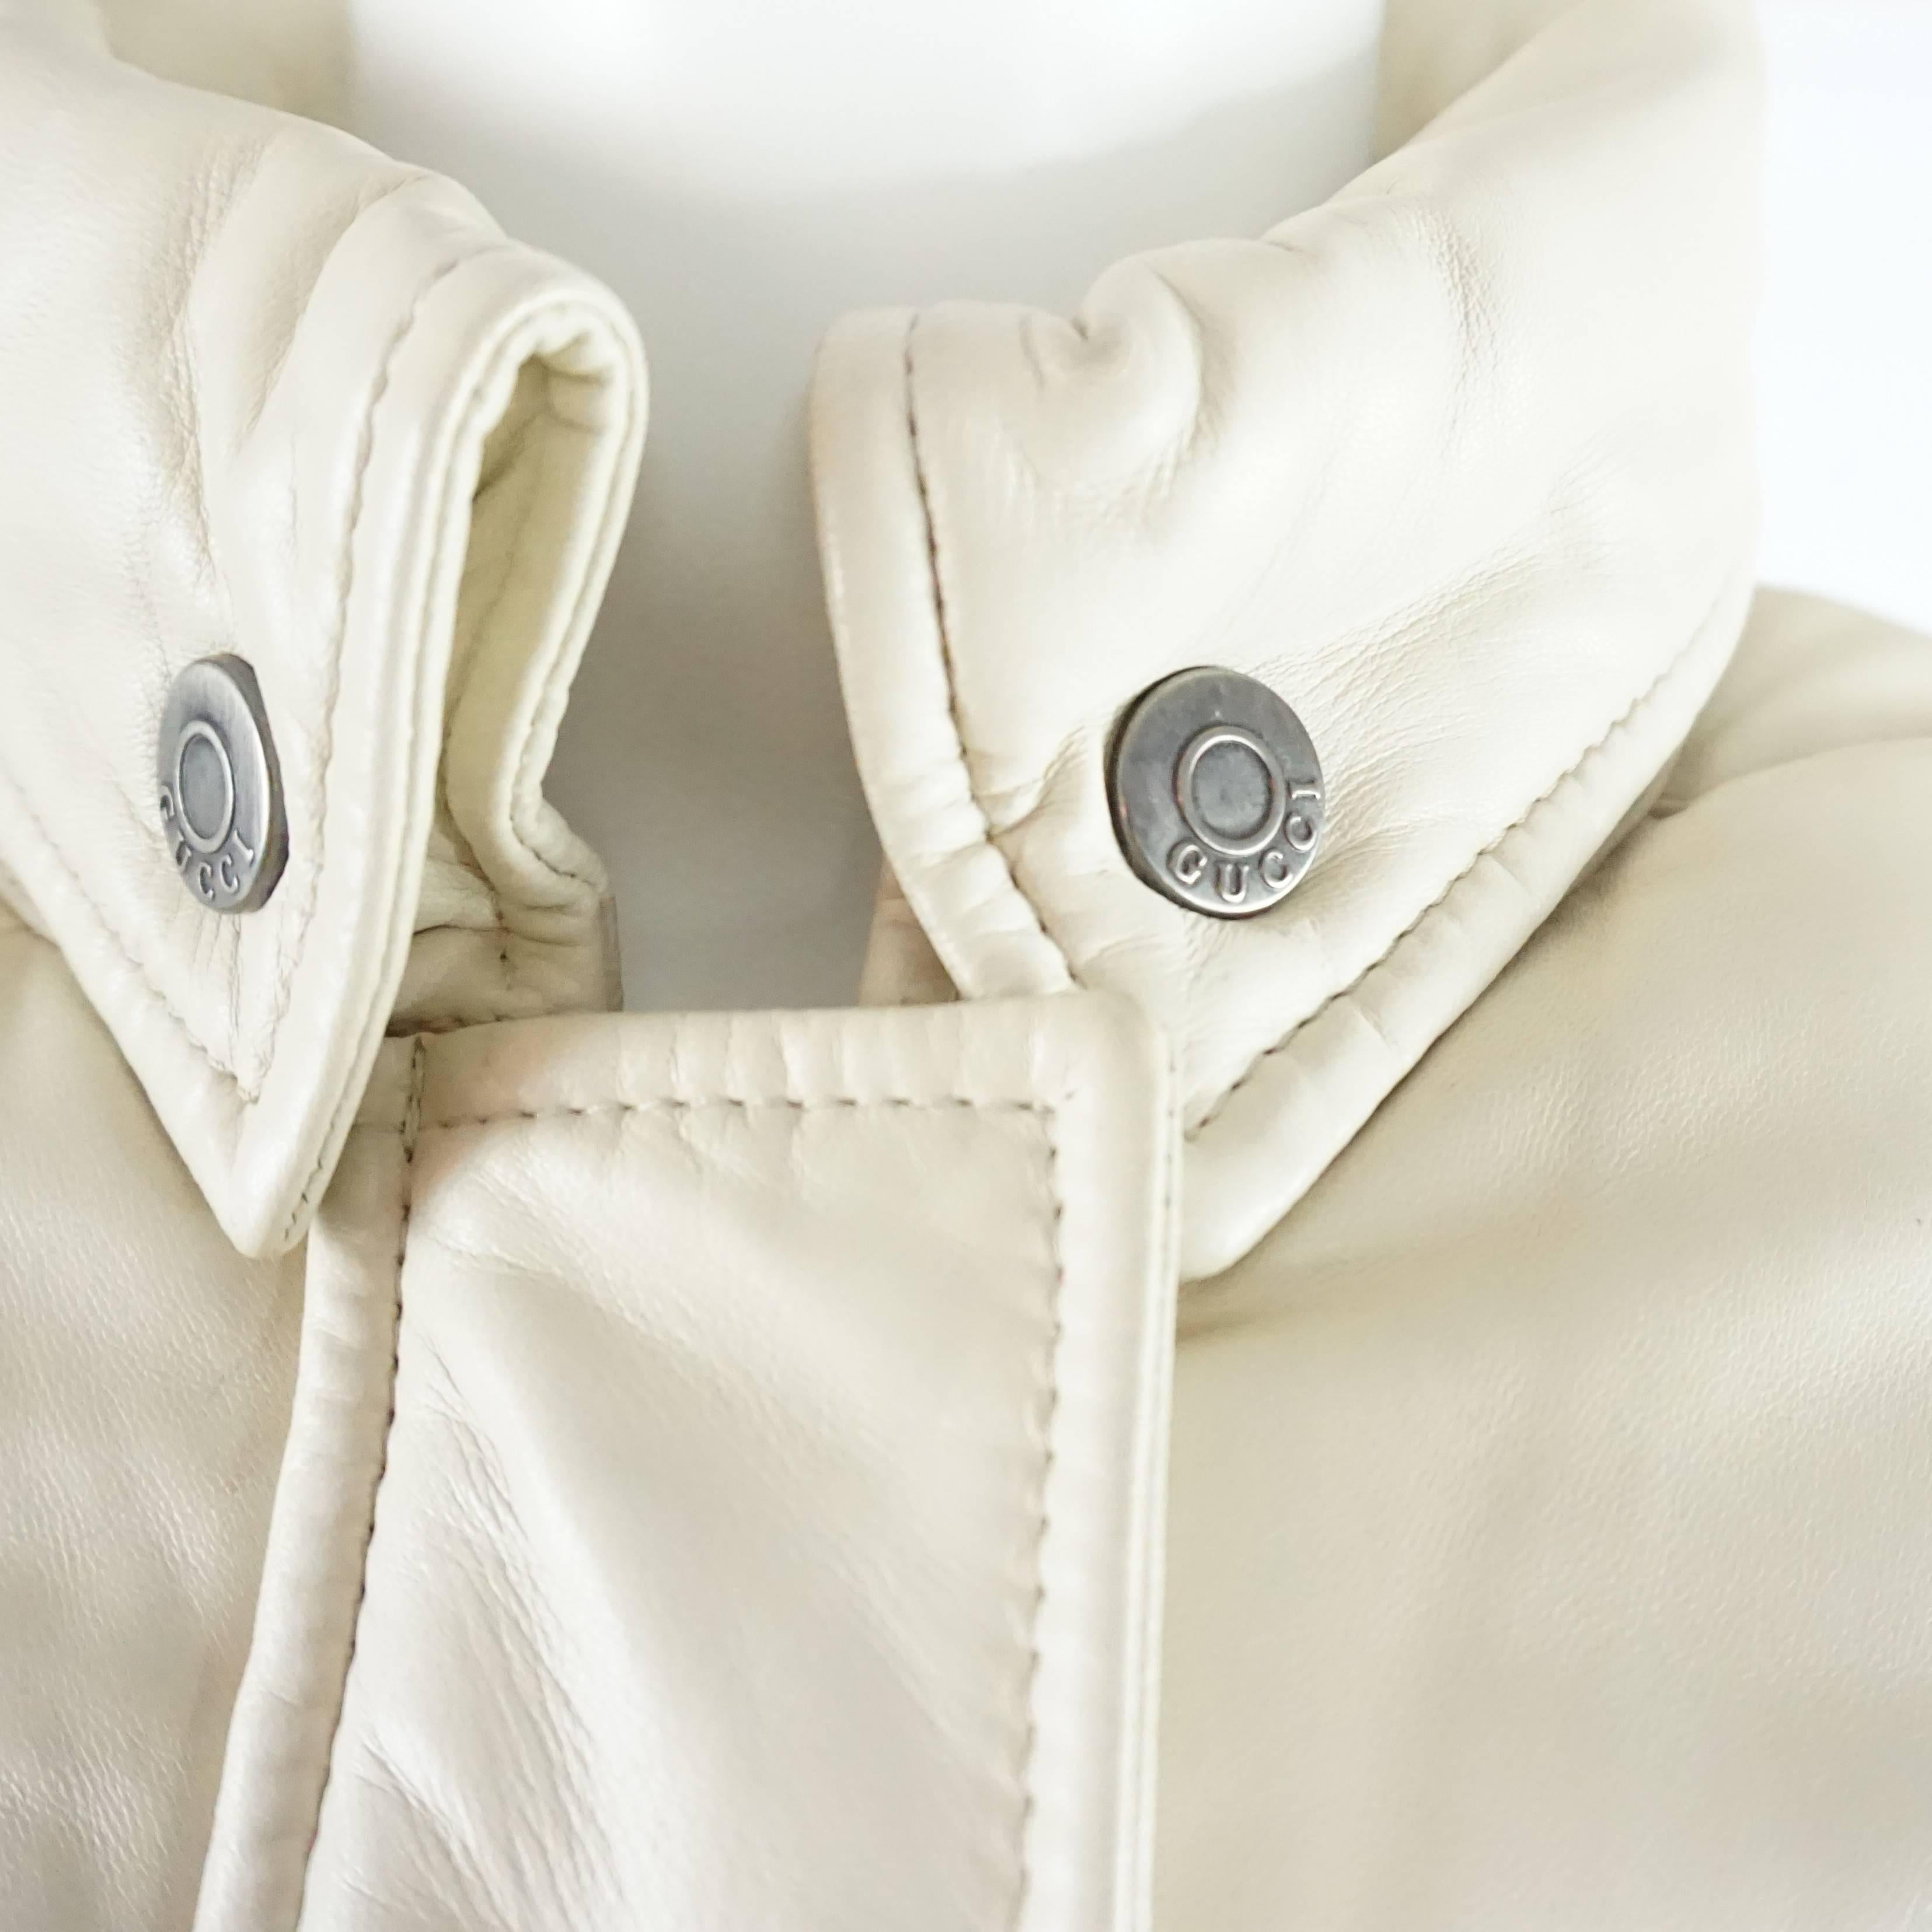 Women's Gucci Bone Leather Puffer Jacket with Hood - 46